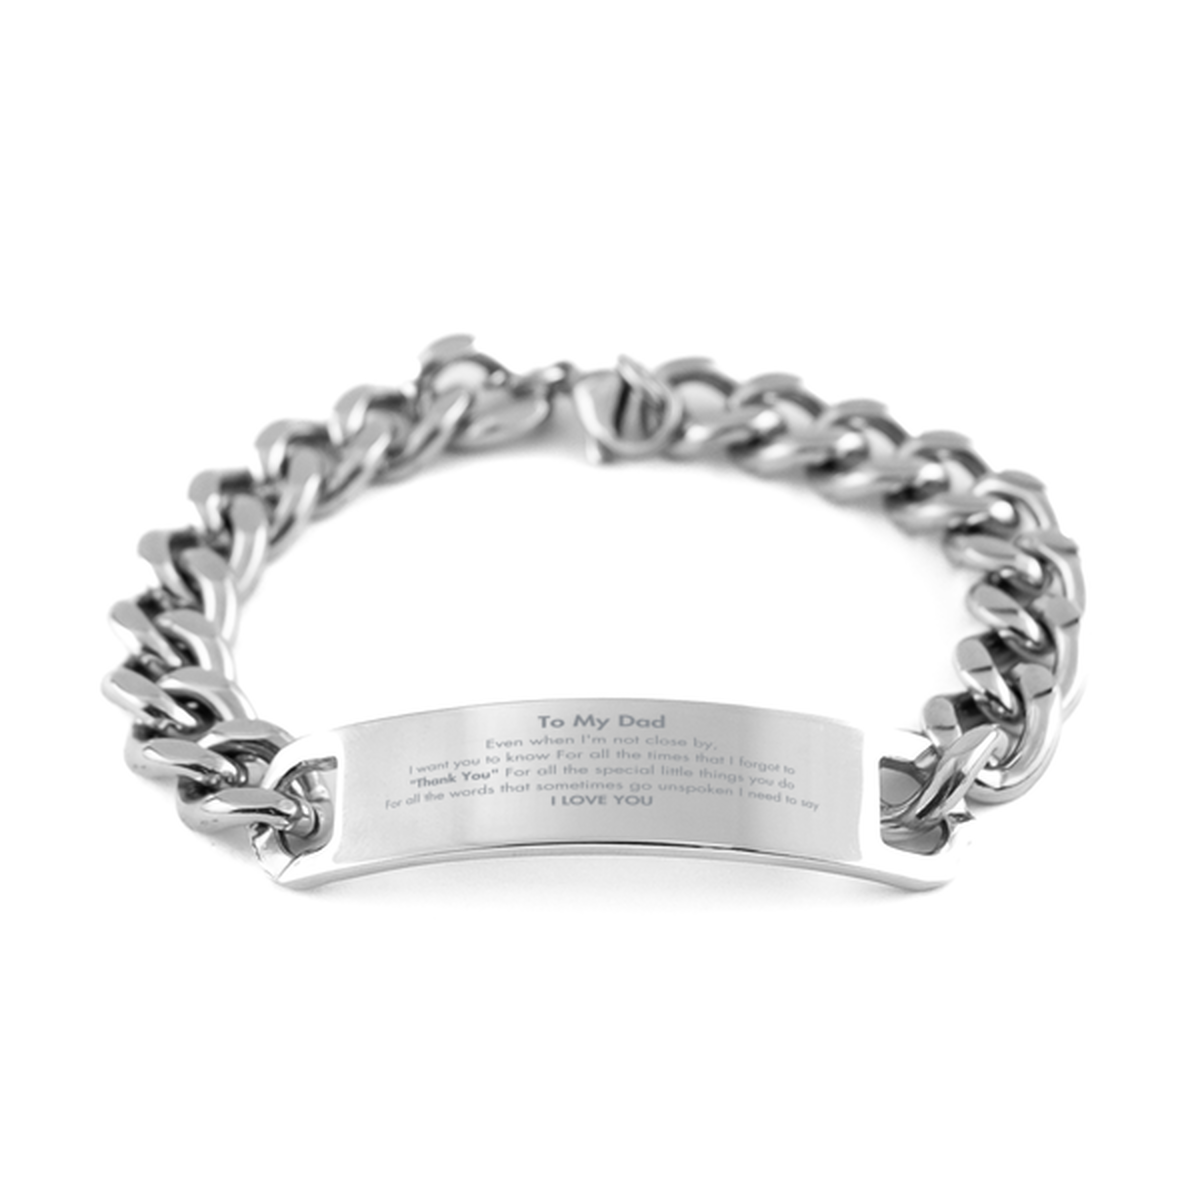 Thank You Gifts for Dad, Keepsake Cuban Chain Stainless Steel Bracelet Gifts for Dad Birthday Mother's day Father's Day Dad For all the words That sometimes go unspoken I need to say I LOVE YOU